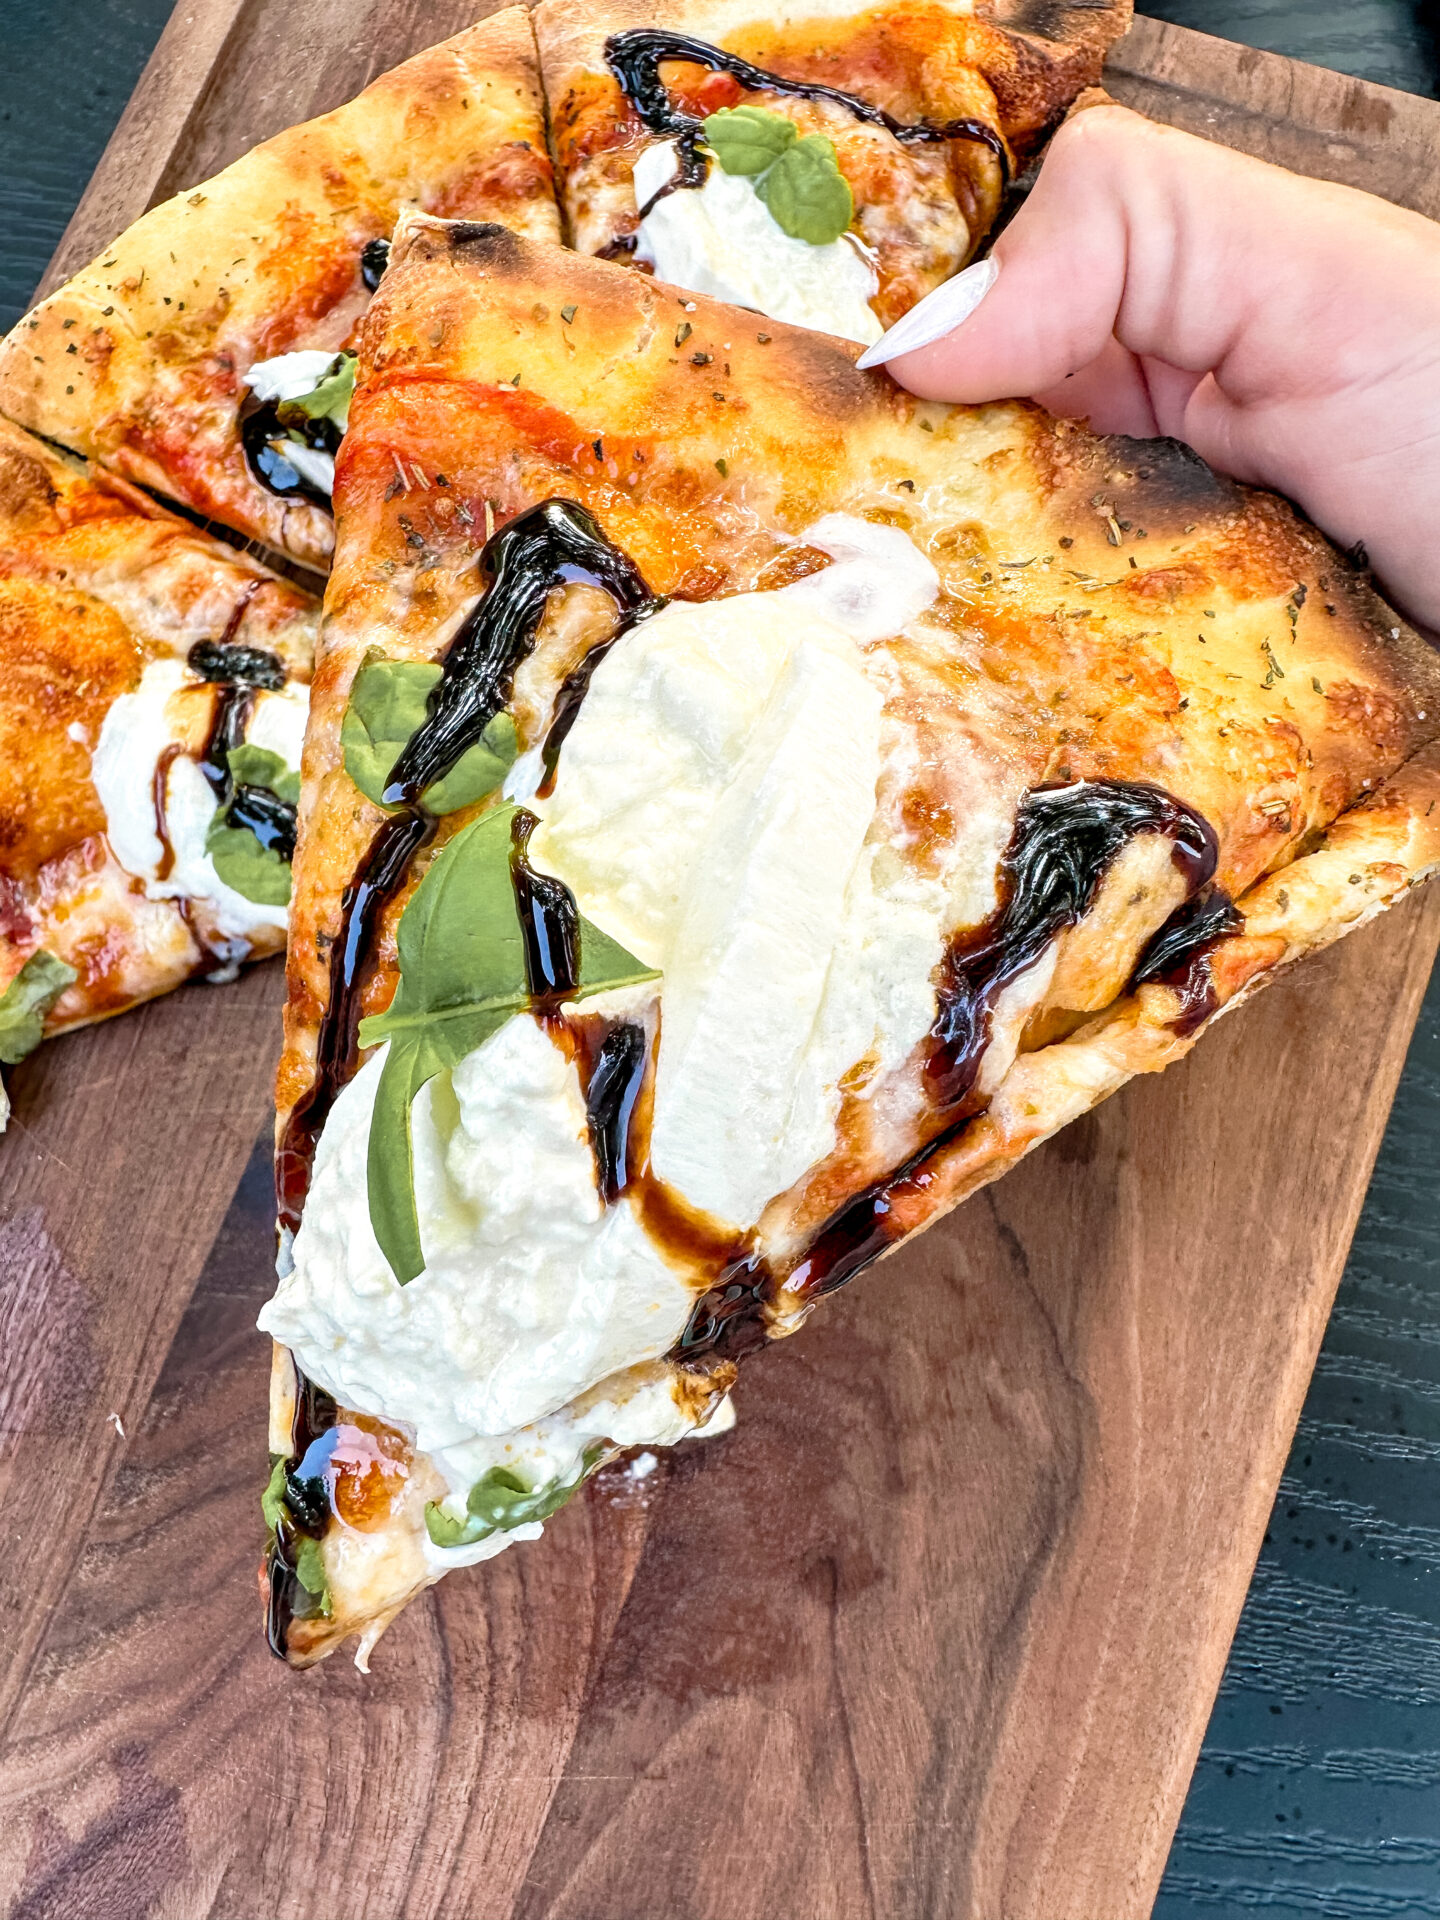 Why You Need This Ooni Infrared Thermometer to Make Great Pizza